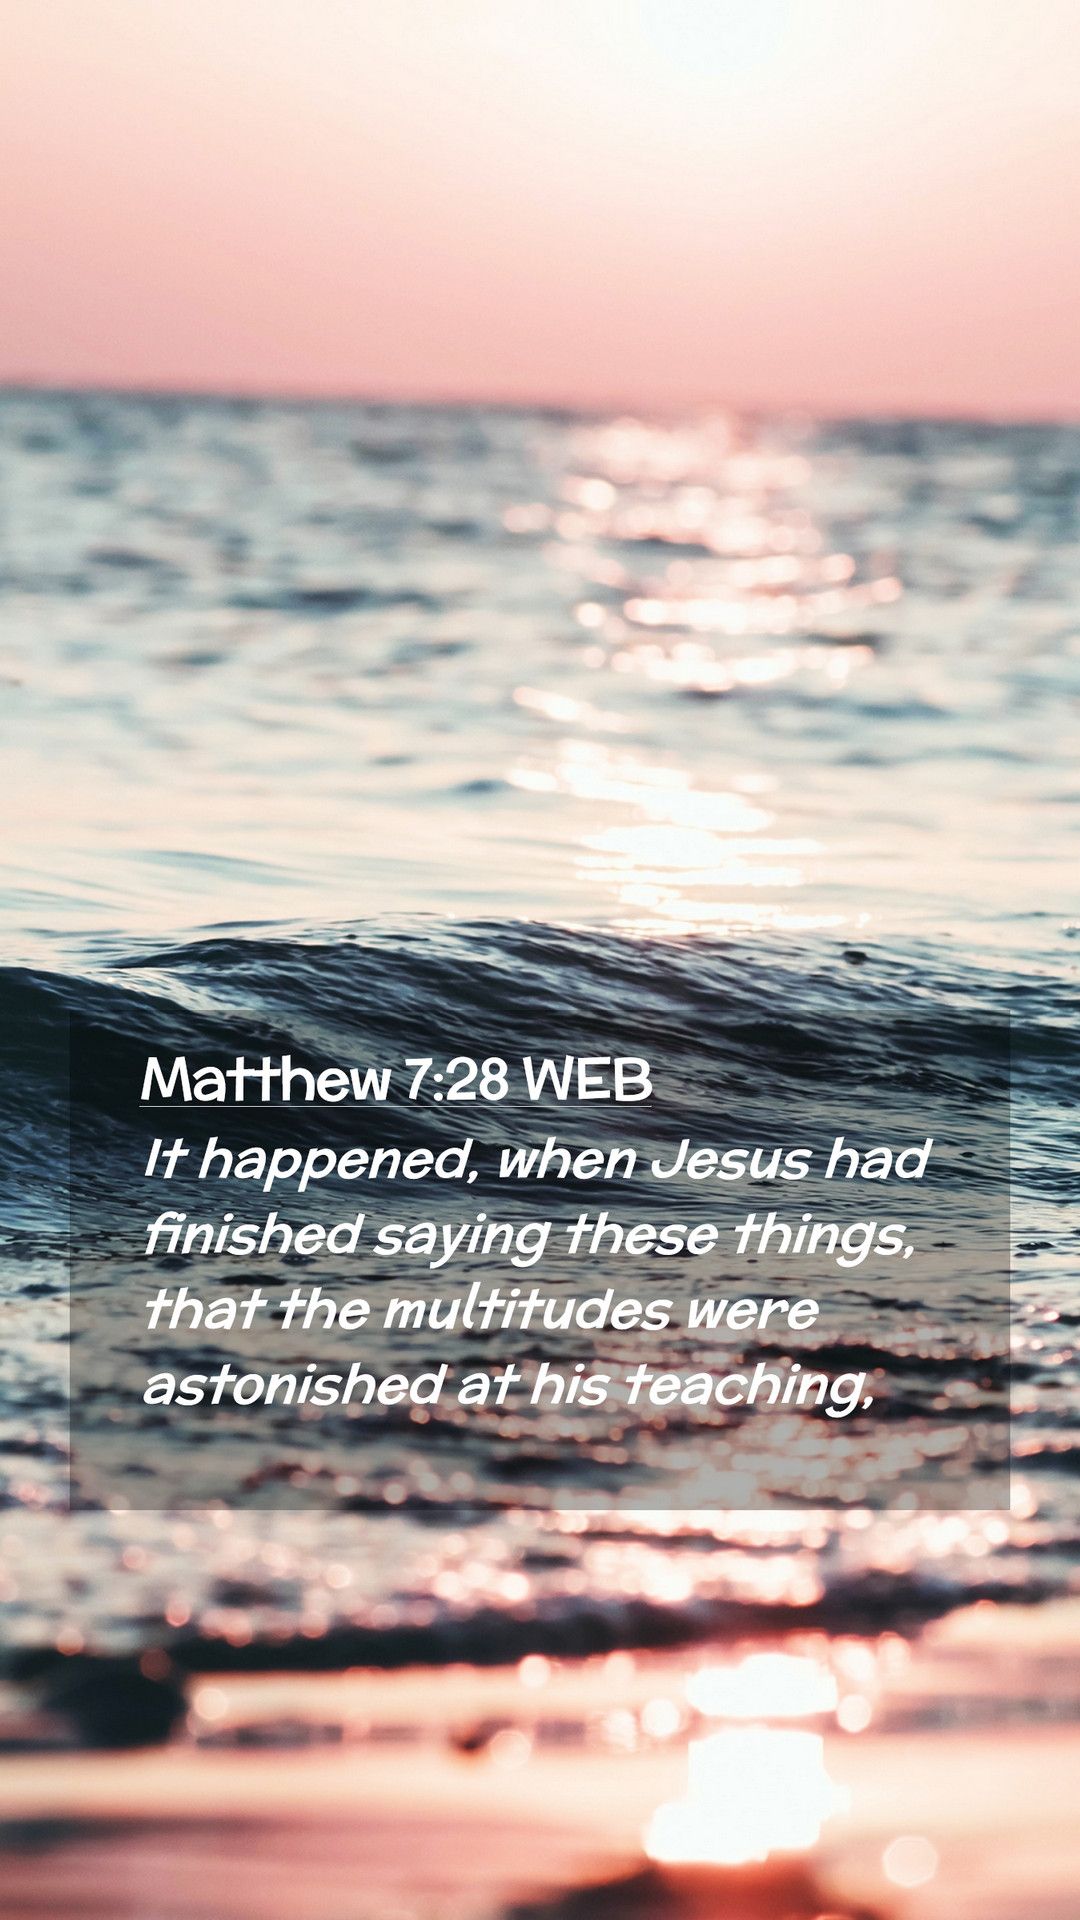 Matthew 7:28 WEB Mobile Phone Wallpaper happened, when Jesus had finished saying these